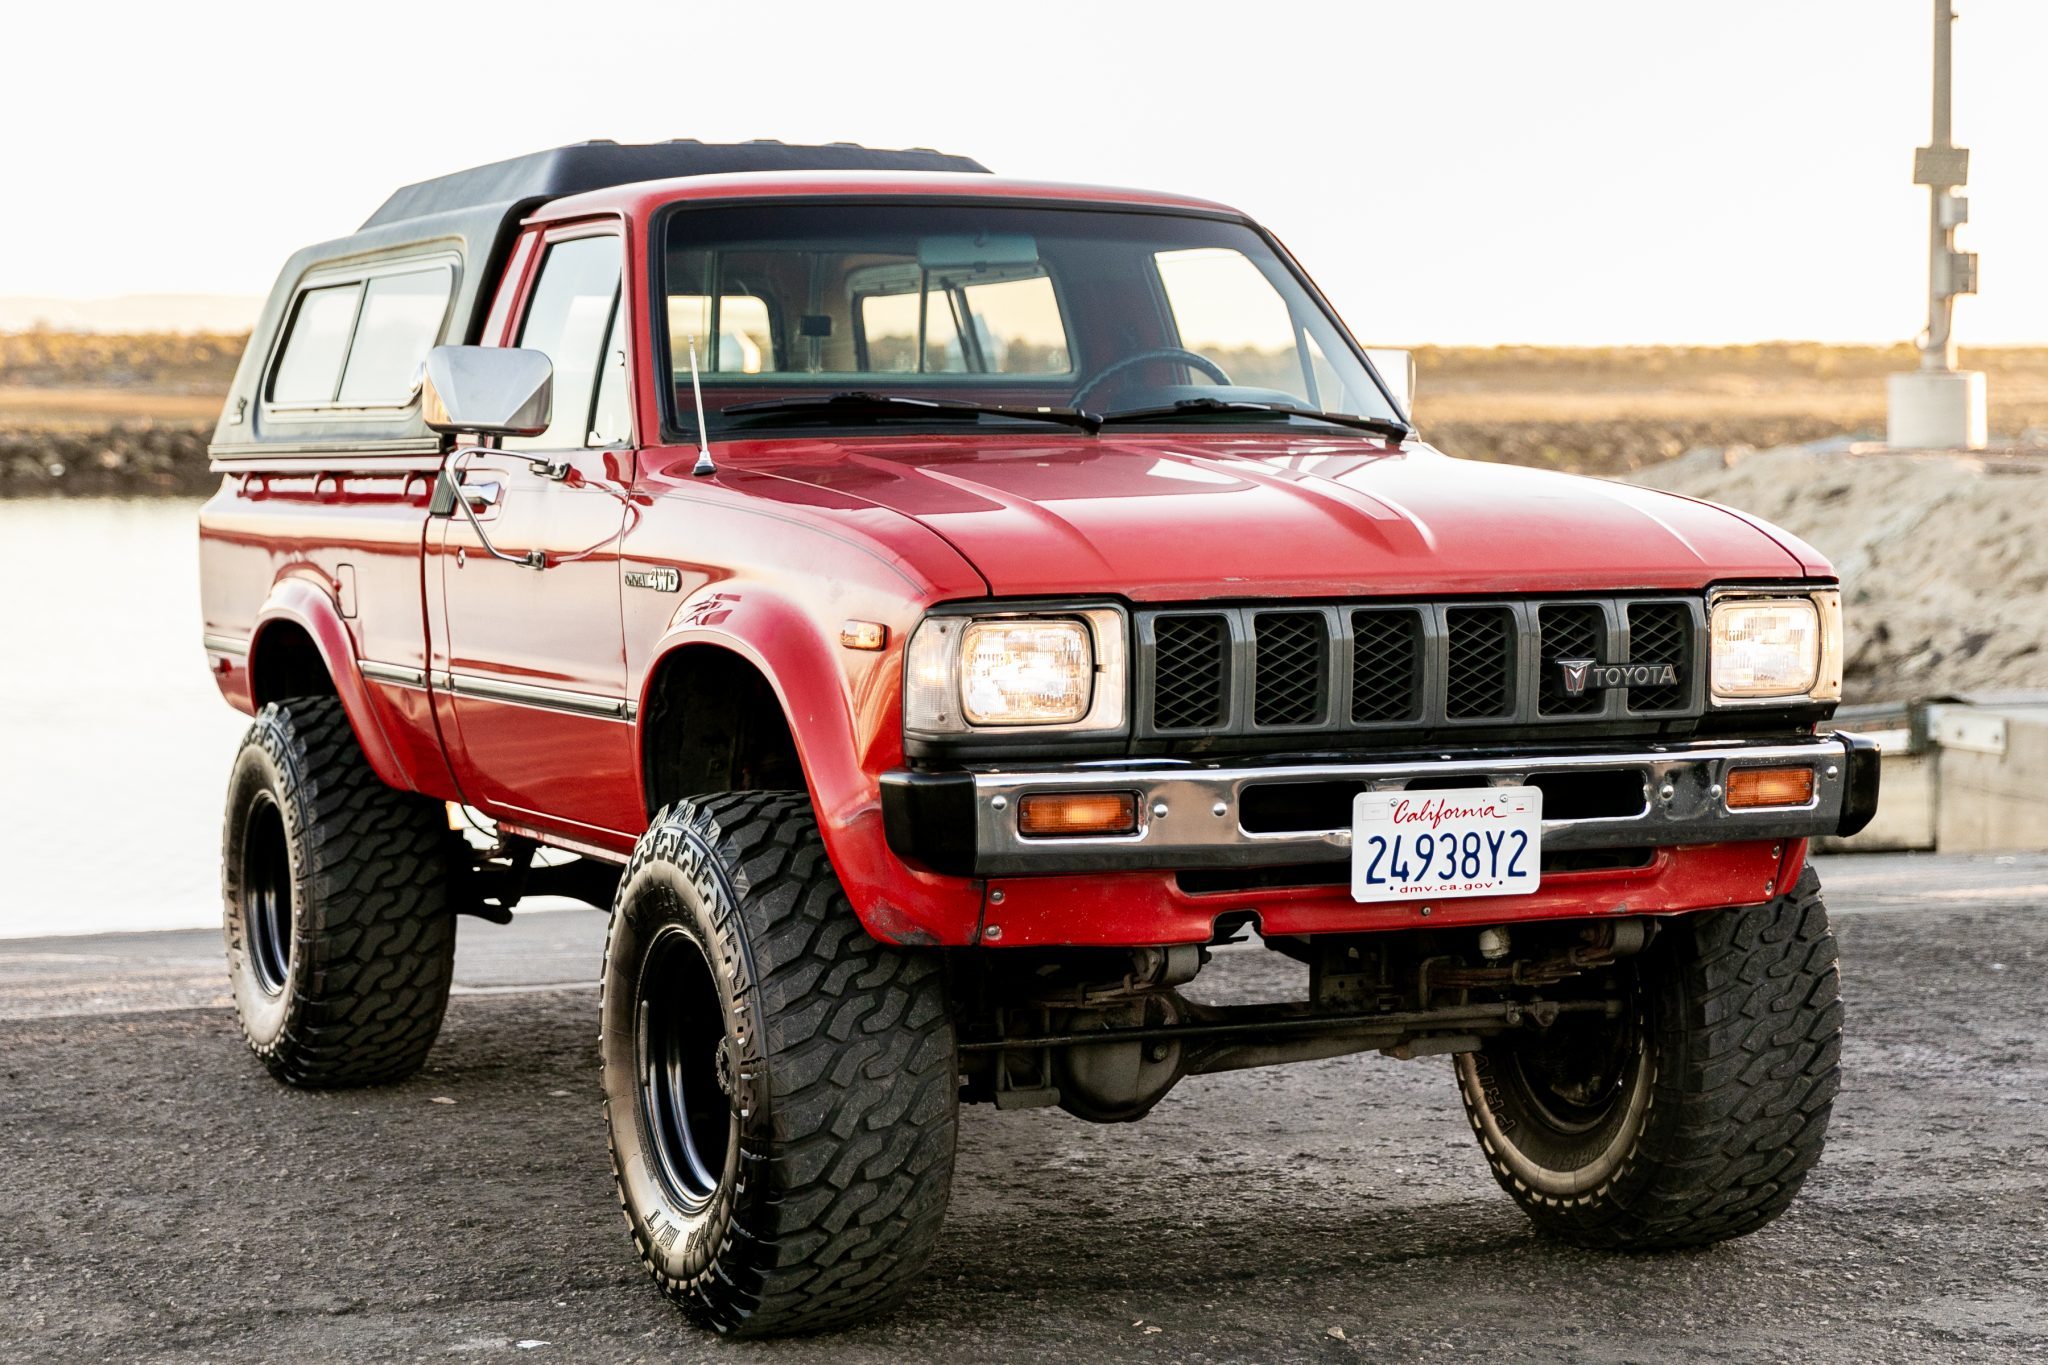 This 1982 Toyota Pickup With 33” OffRoad Tires Has the Perfect Stance